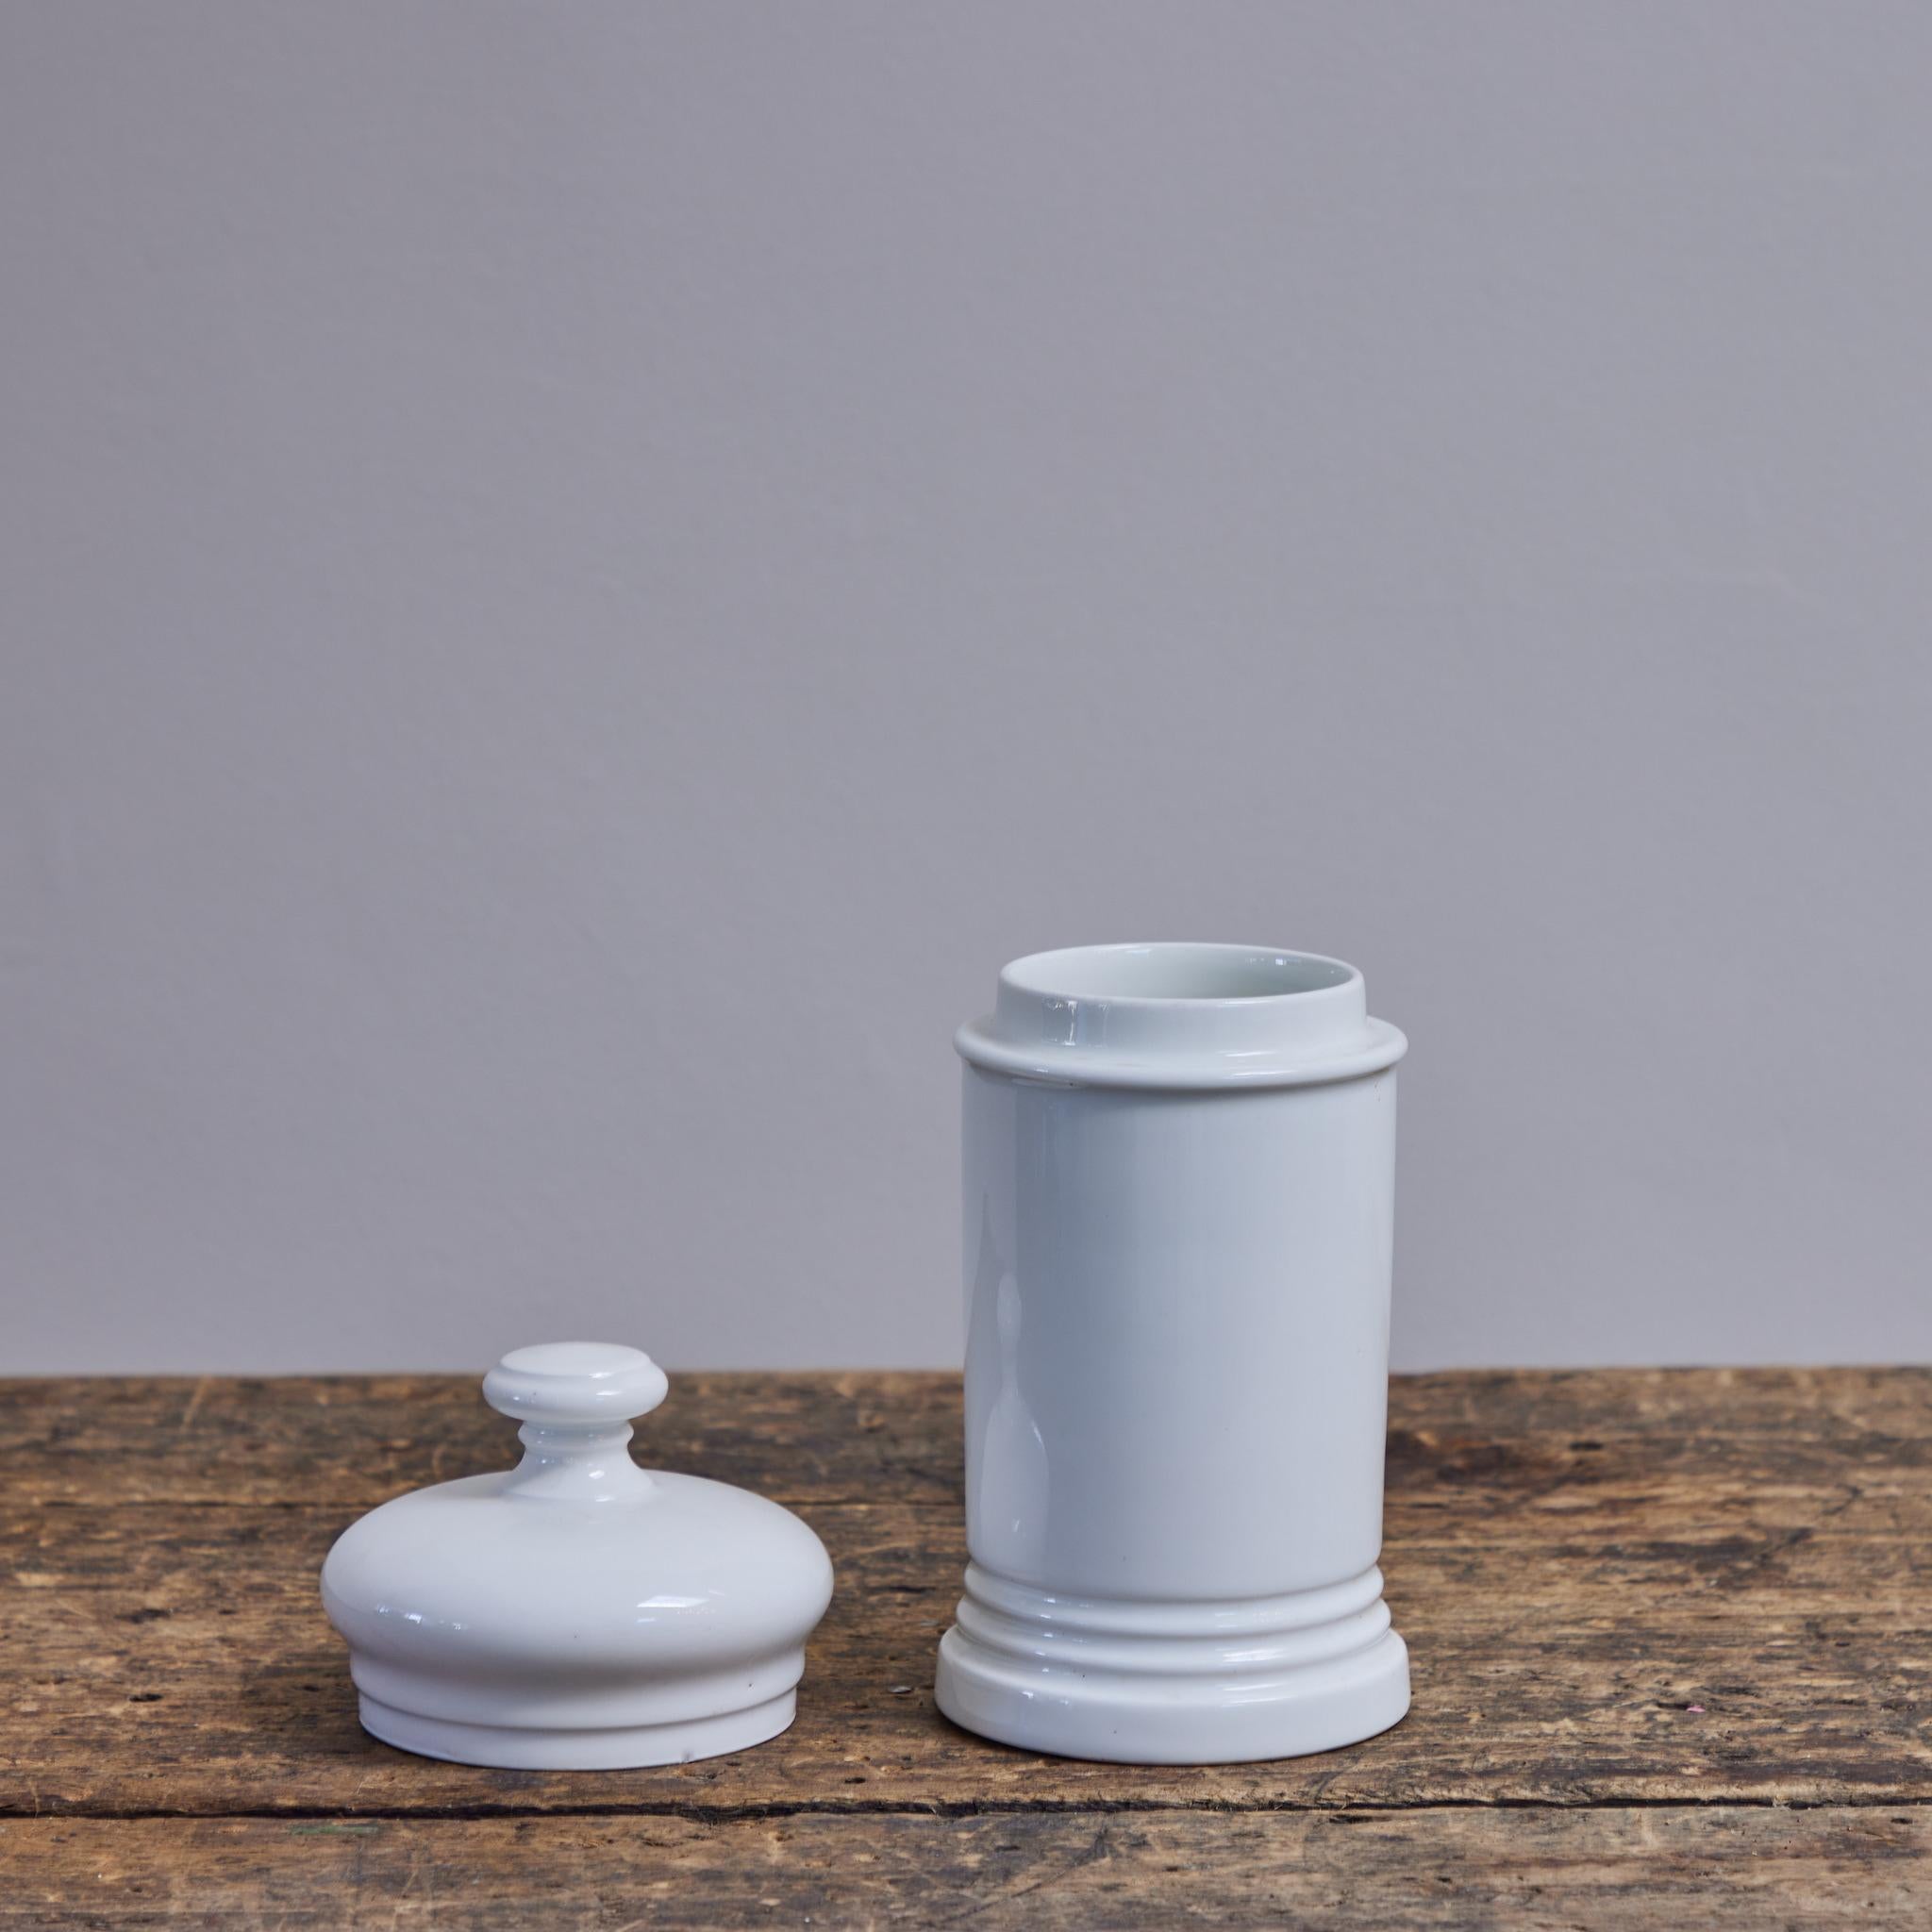 Spanish White Porcelain Canisters from an Herb Dispensary For Sale